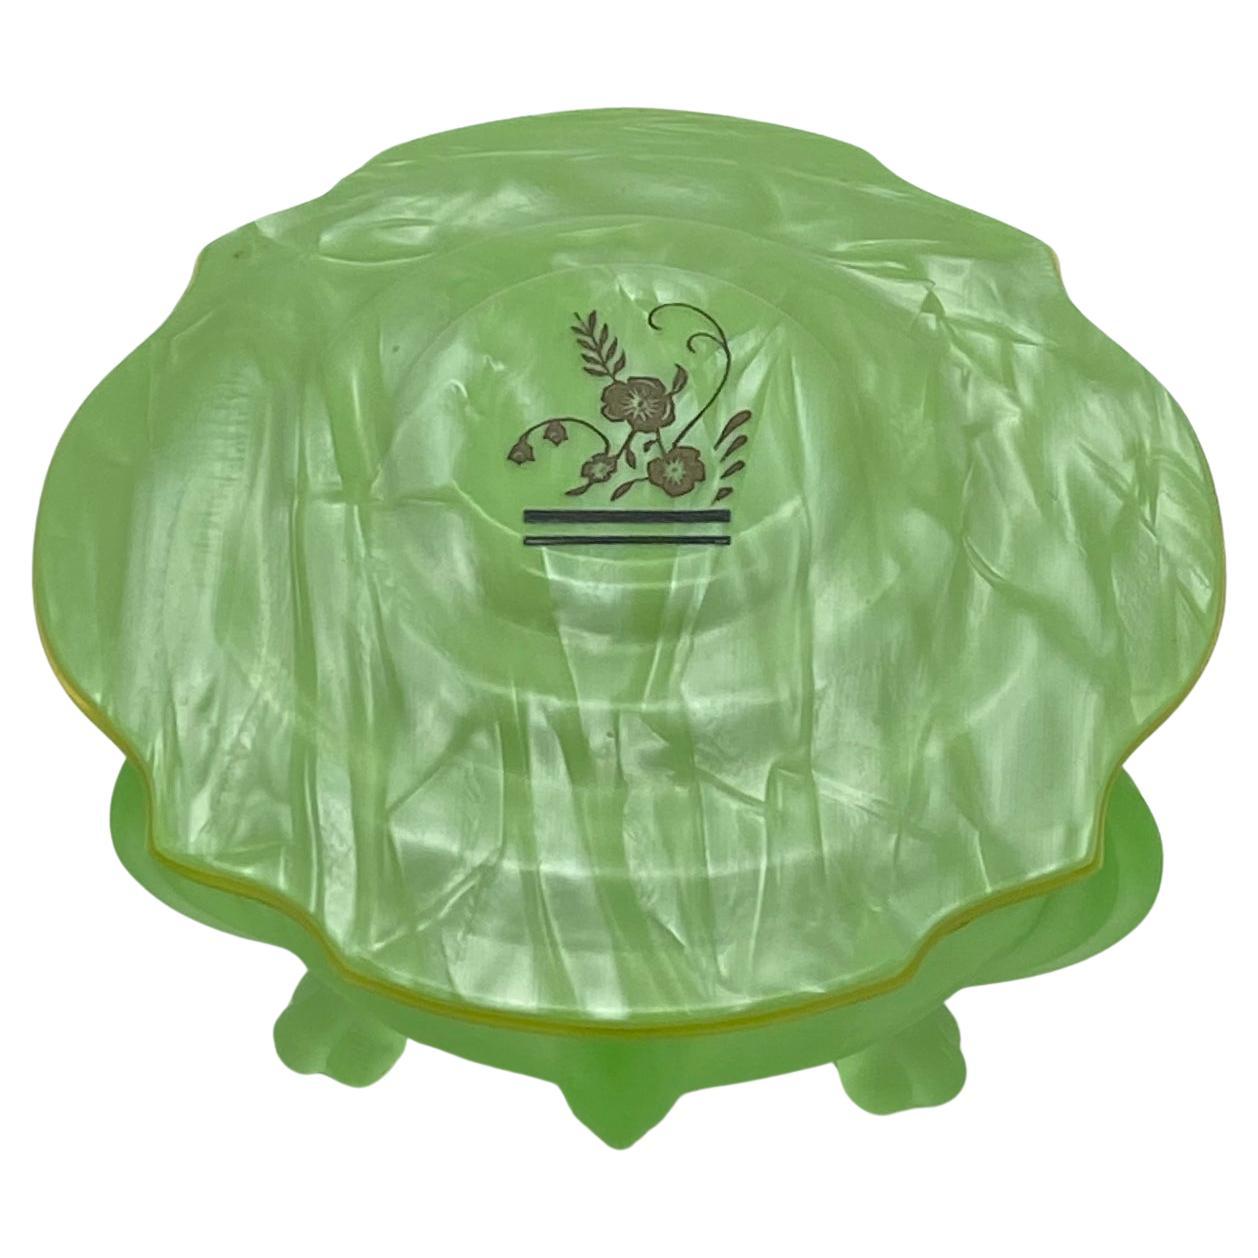 This is an Art Deco style bath powder box. The box has a celluloid lid with green marbolized top and amber color underlayer. It has a foster green glass body with three feet. The perfect touch for your vintage lifestyle!

Nouveau Boutique does not